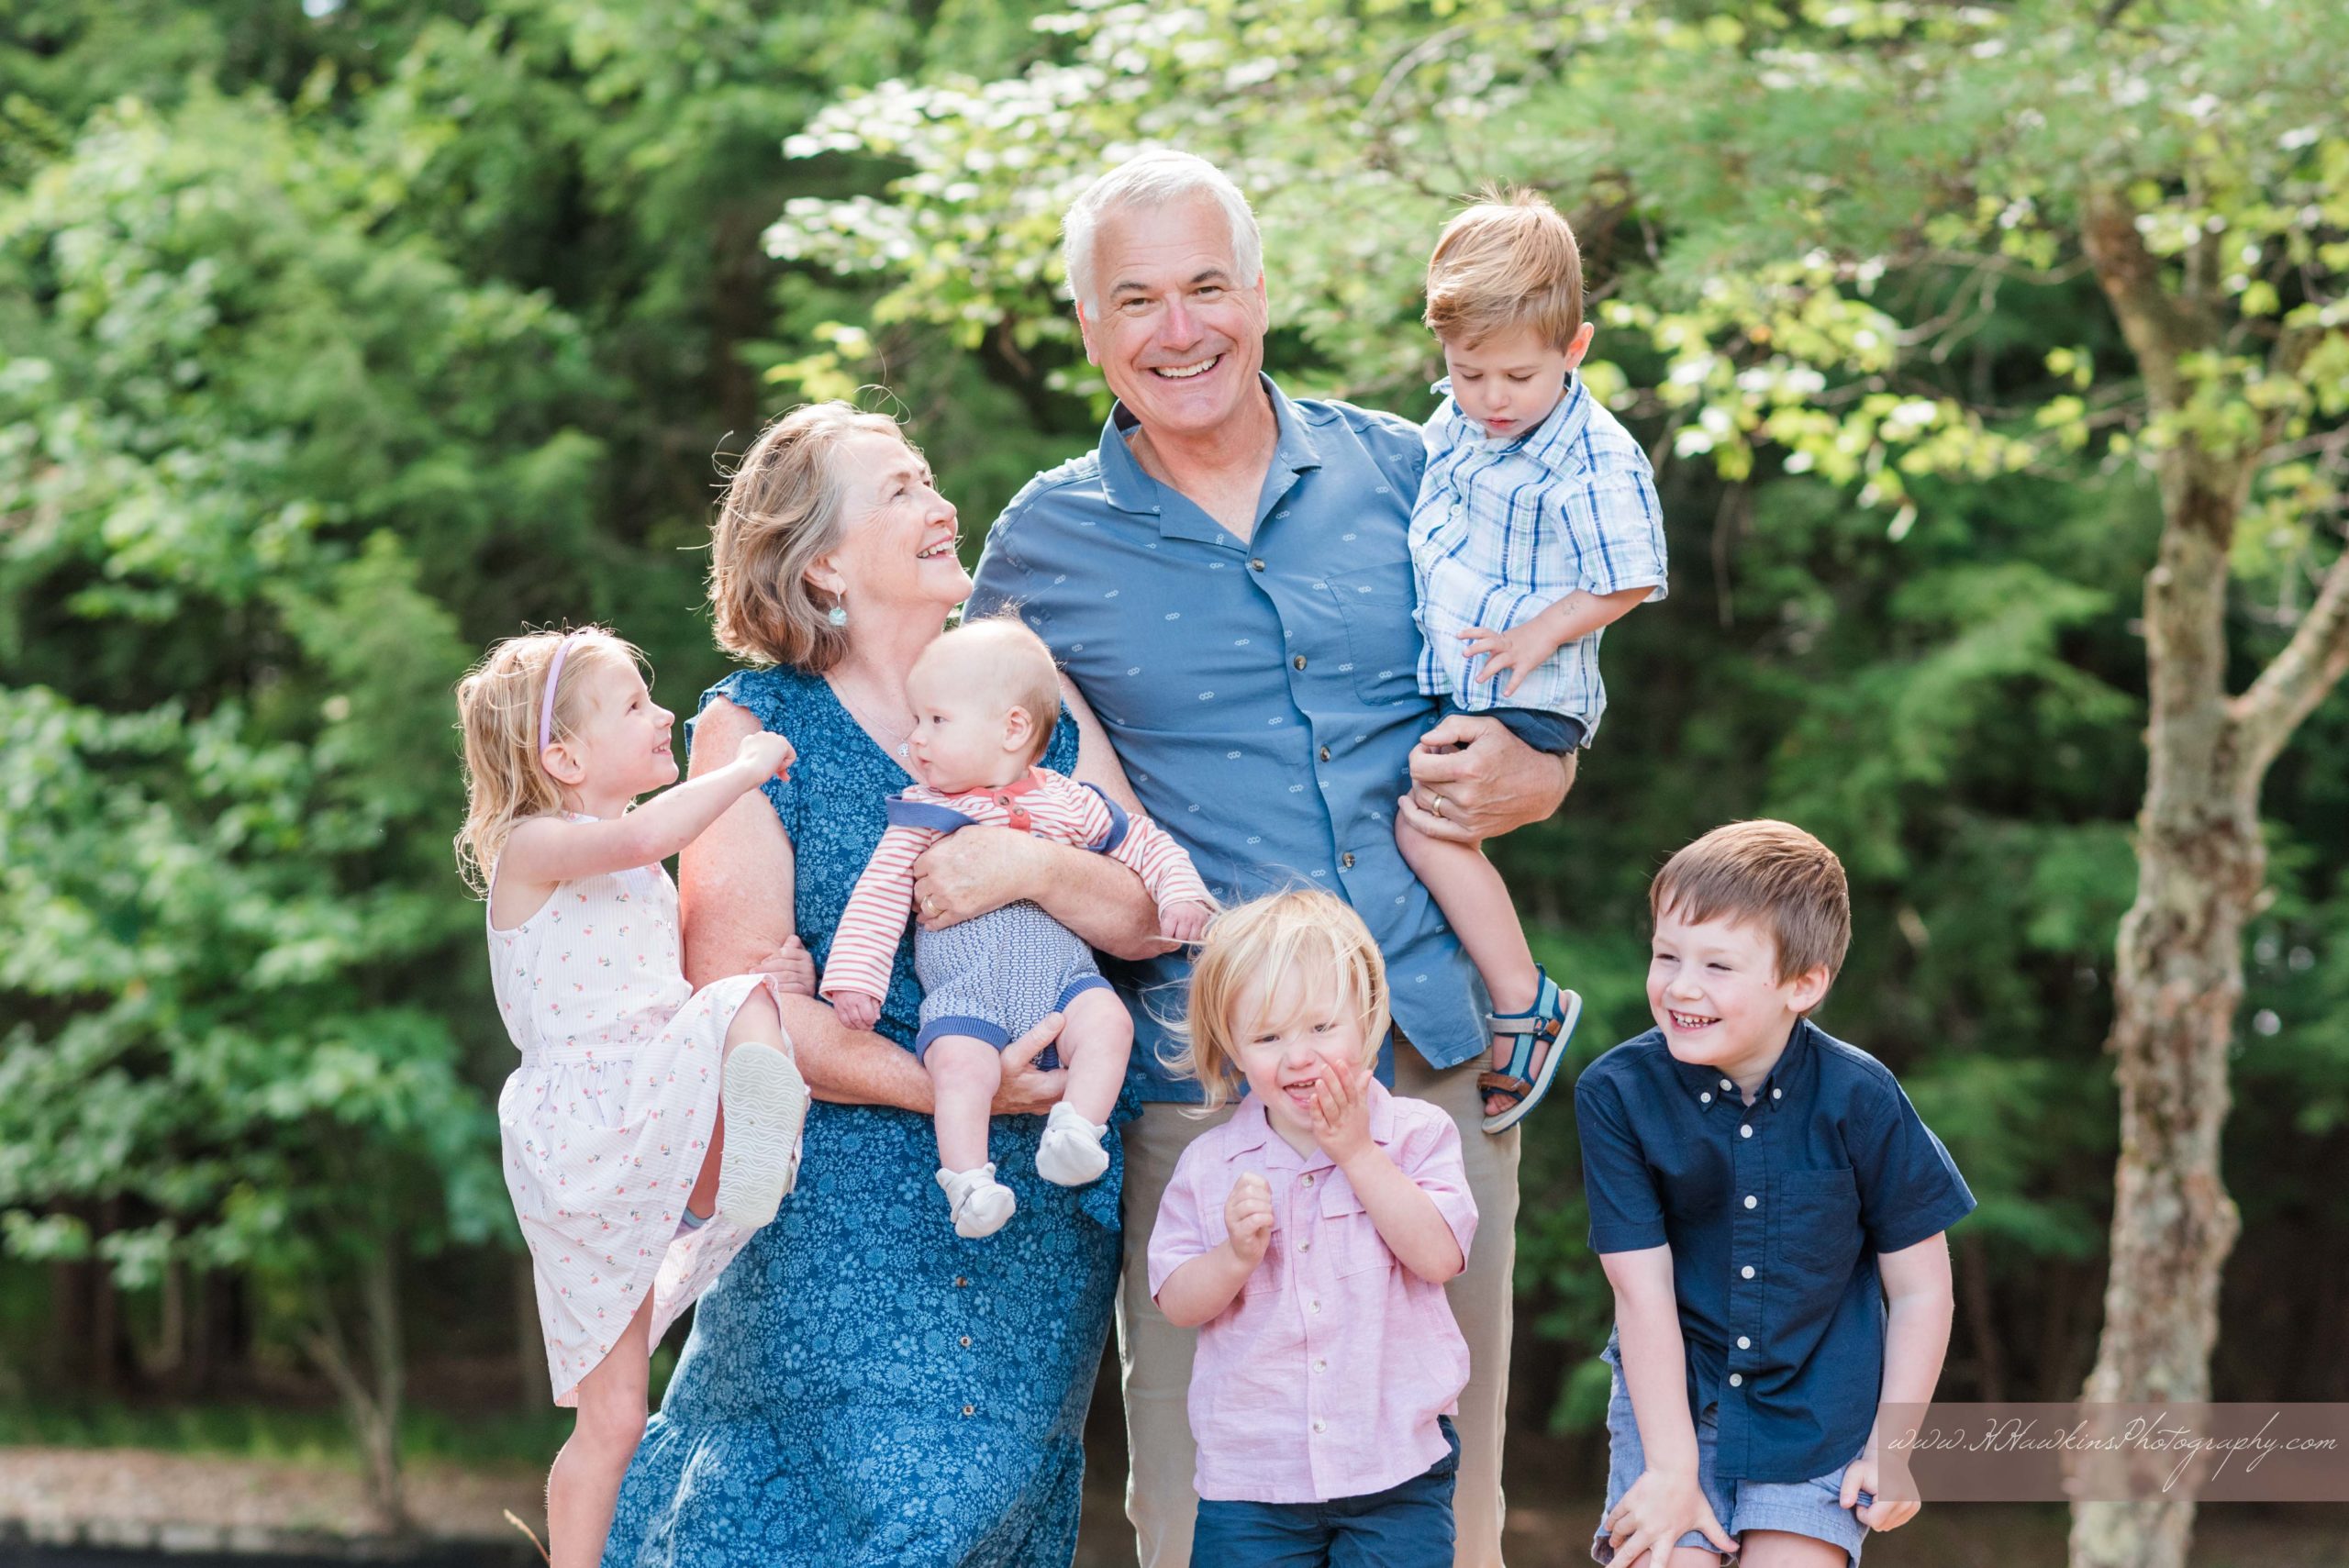 Grandma, Grandpa and their grandkids for extended inlet ny family pictures